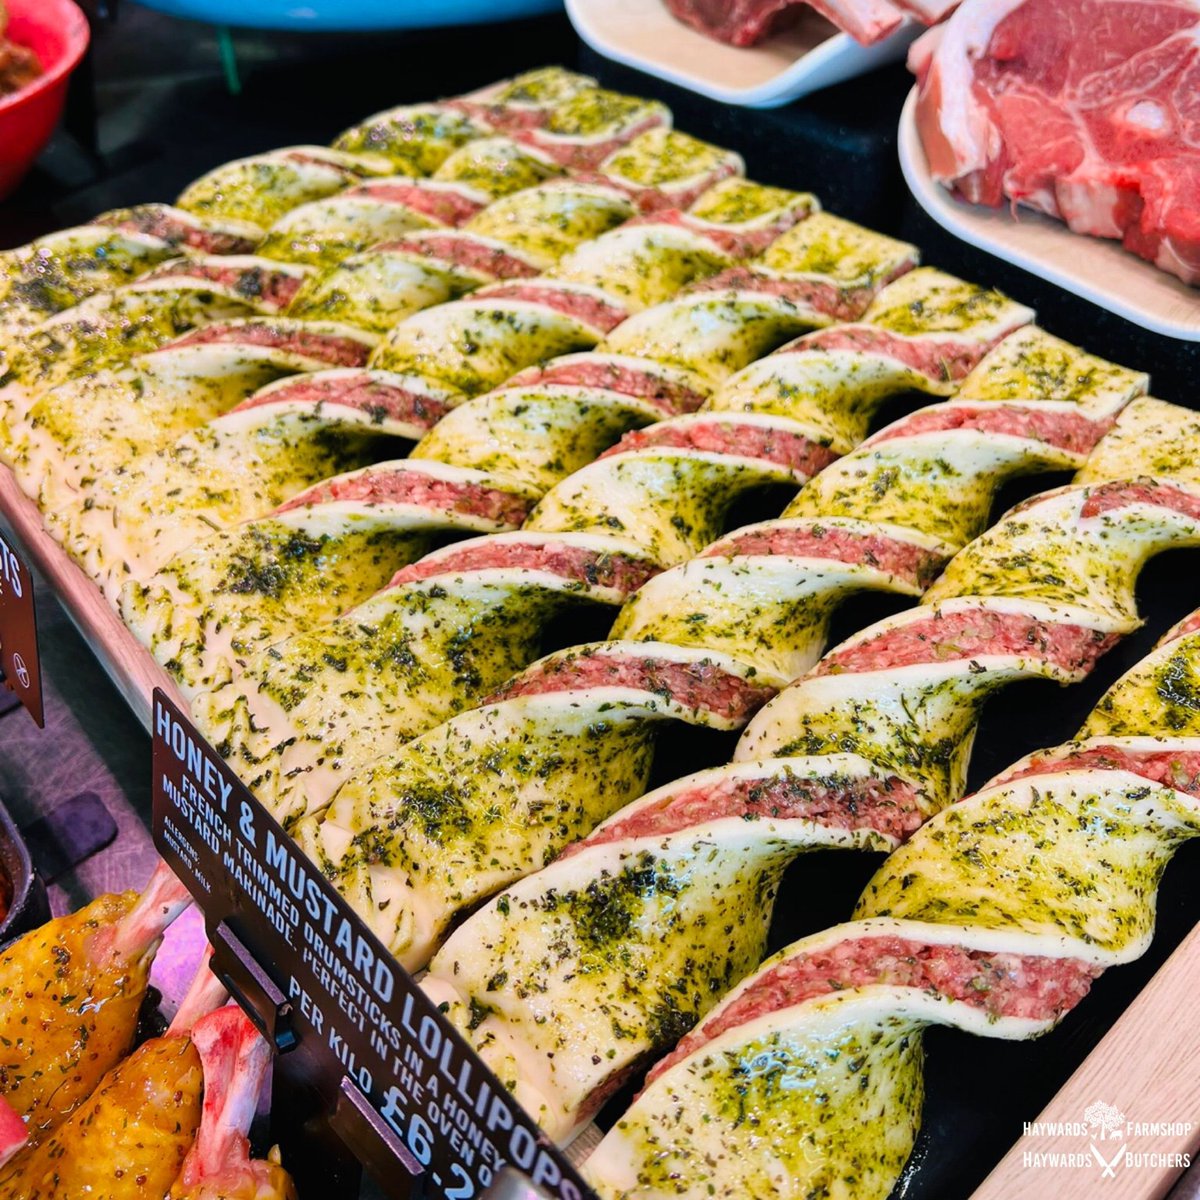 🐑 ✨ Dive into deliciousness with our Lamb's Twist! Puff pastry with a flavourful filling of lamb, mint, and pea sausagemeat. Perfect for a delightful meal any day of the week. #LambsTwist #SavouryDelights #GourmetTreats #ShopLocal #Farmshop #Butchers #Tonbridge #Haywards1990